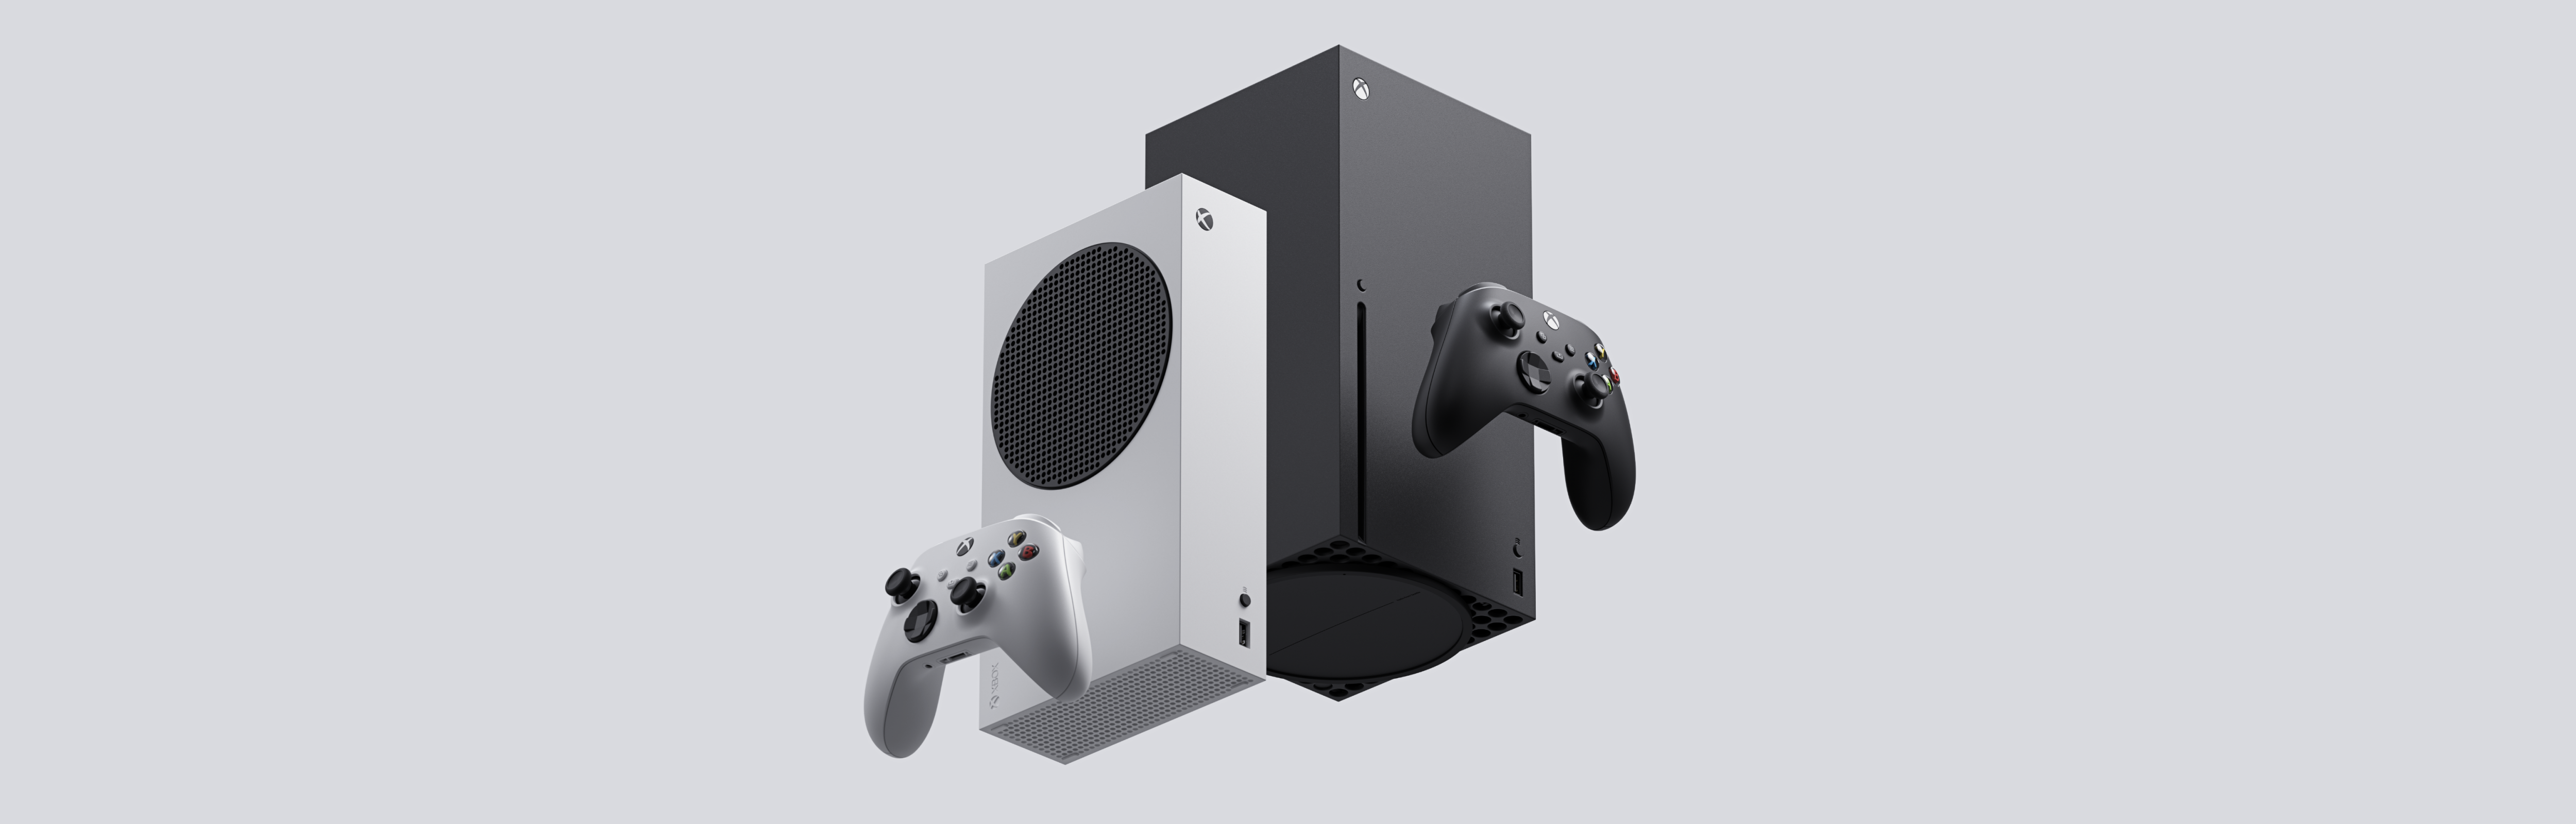 Behind the Design: Xbox Series X and Xbox Series S | by Joline